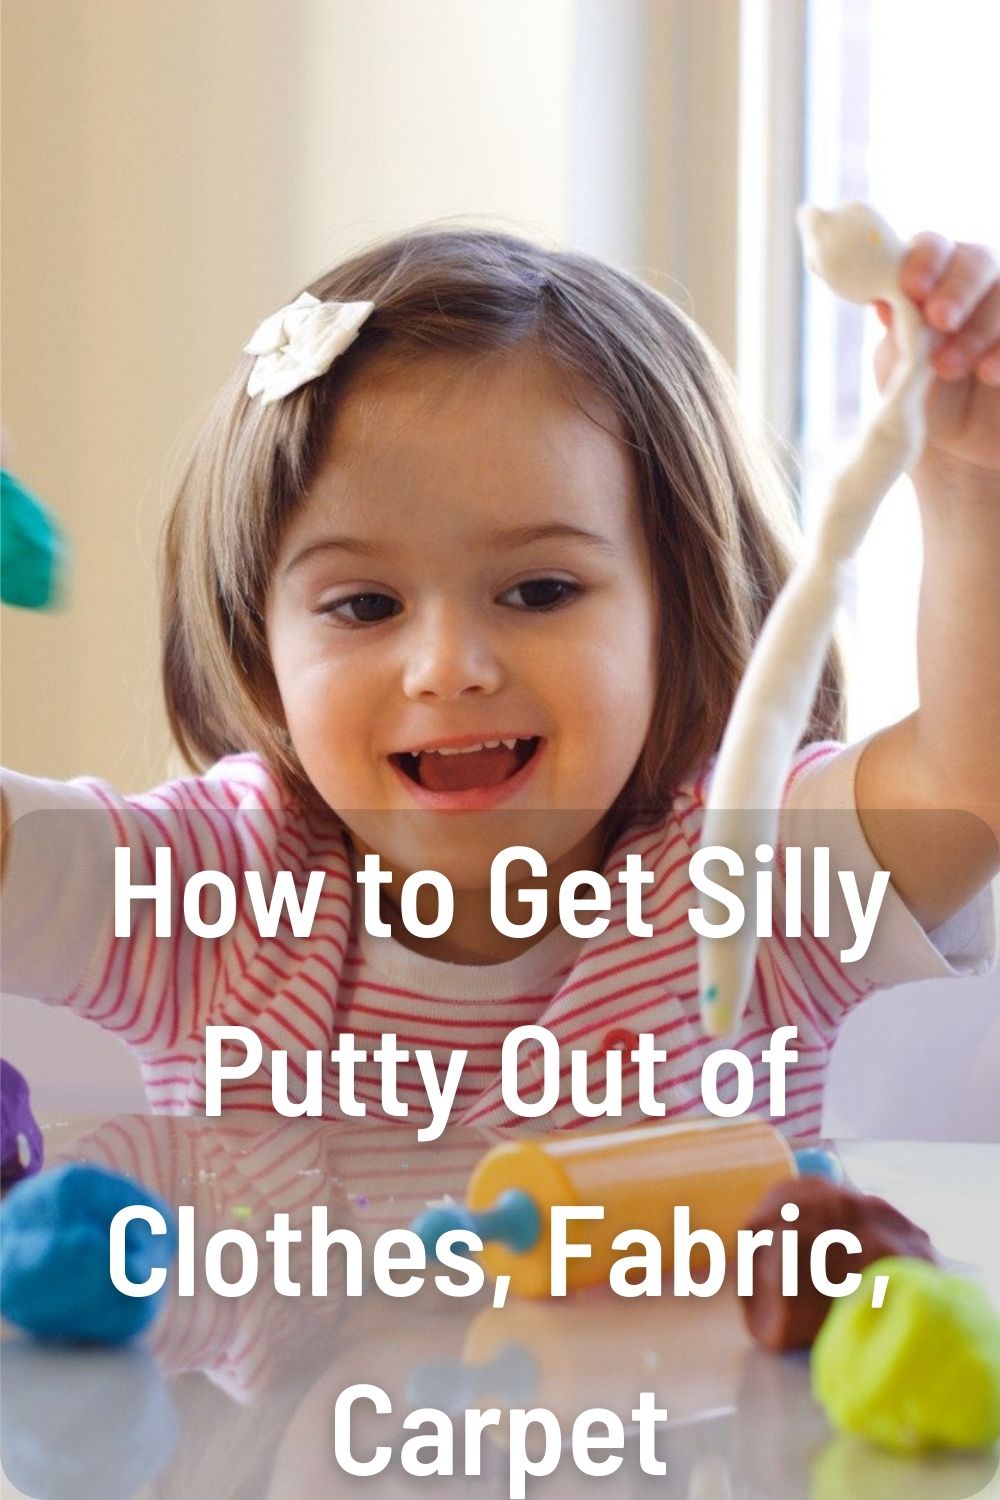 How to Get Silly Putty Out of Clothes, Fabric, Carpet